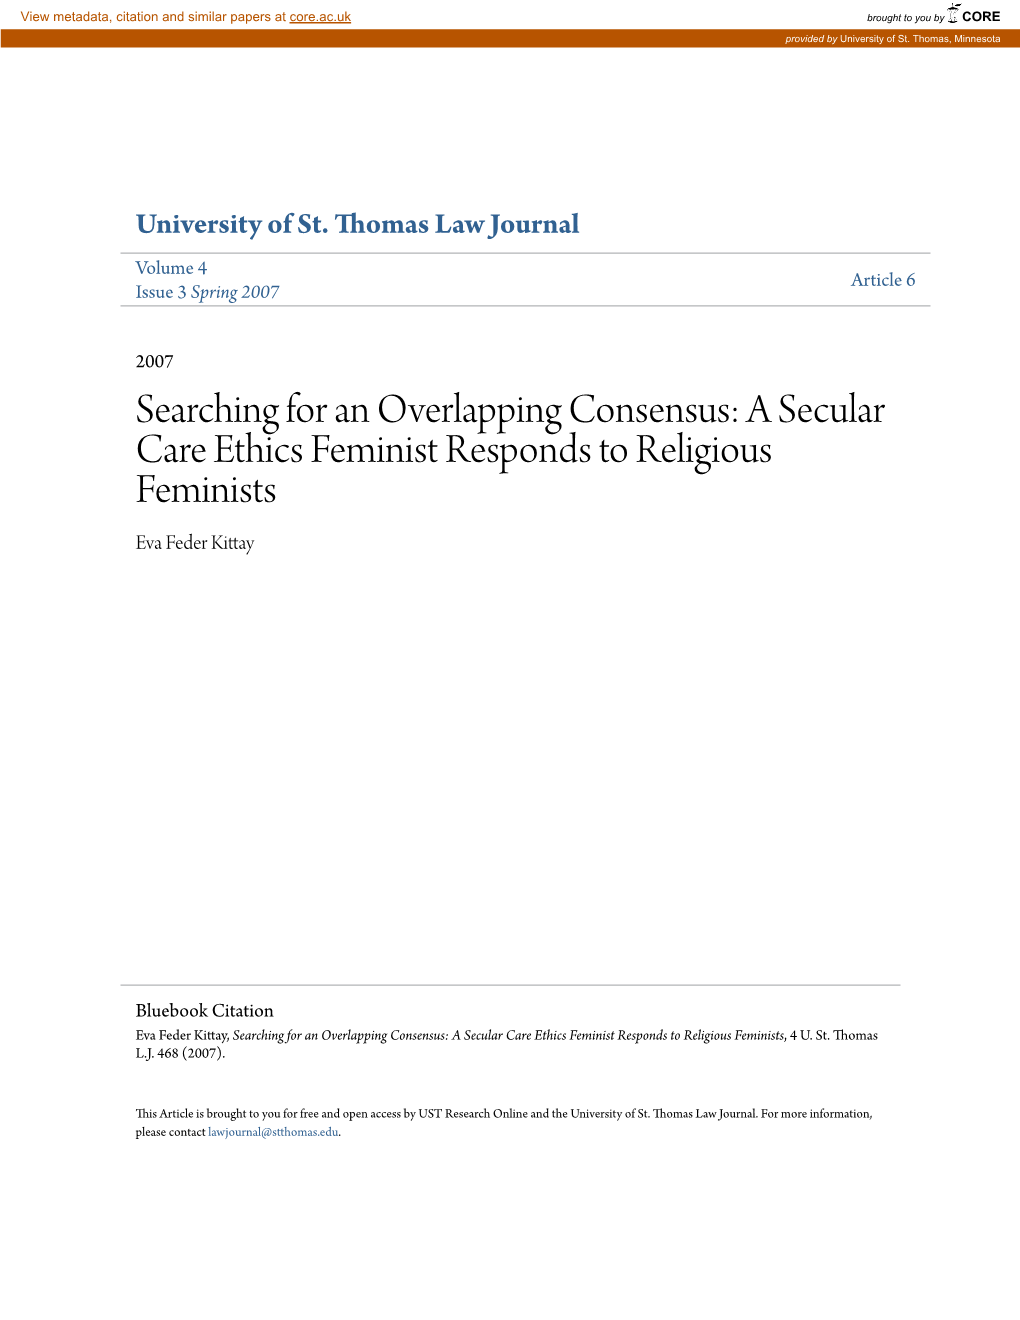 Searching for an Overlapping Consensus: a Secular Care Ethics Feminist Responds to Religious Feminists Eva Feder Kittay